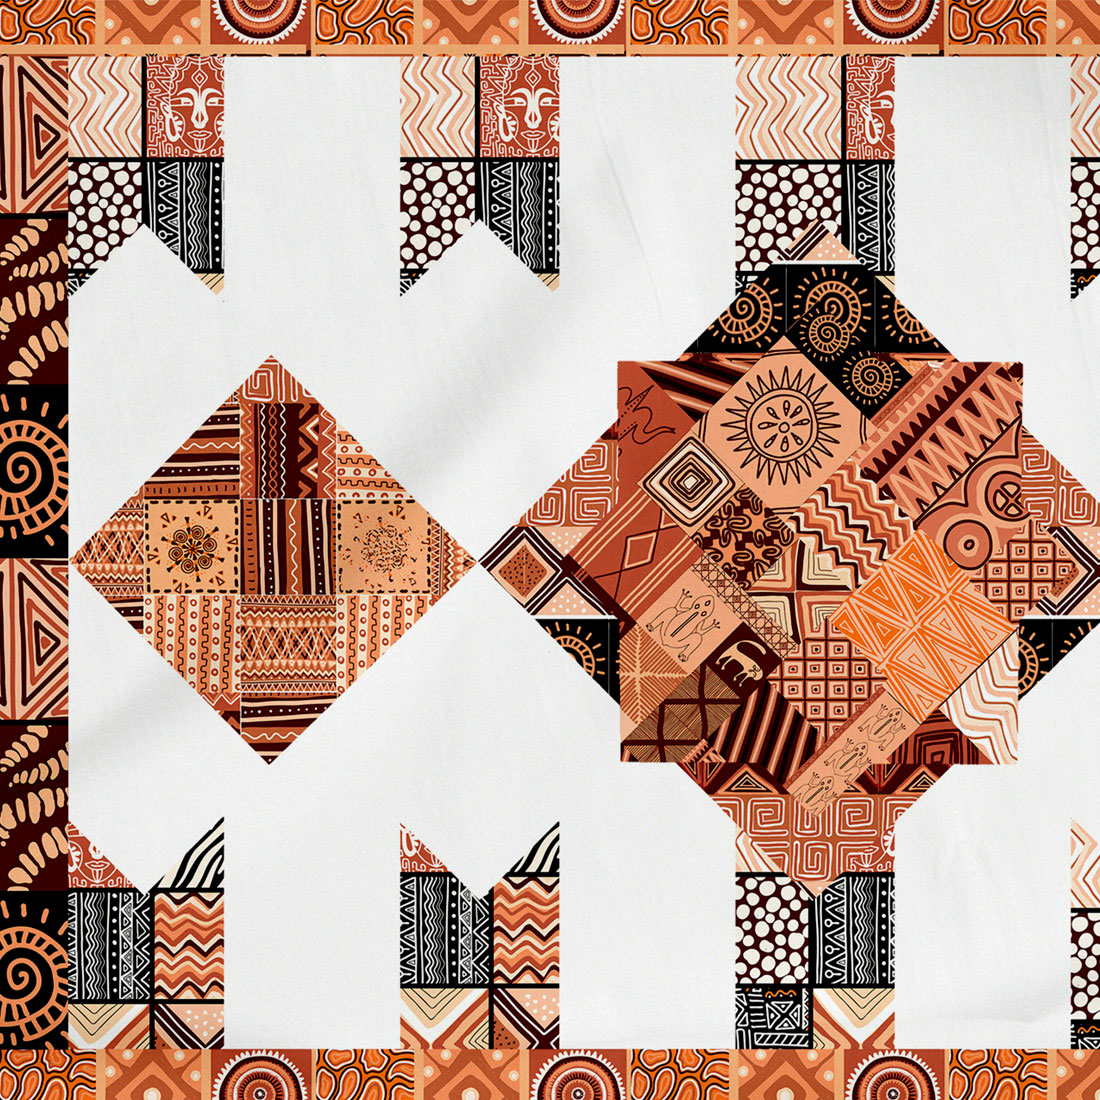 Image with enchanting pattern in African style.